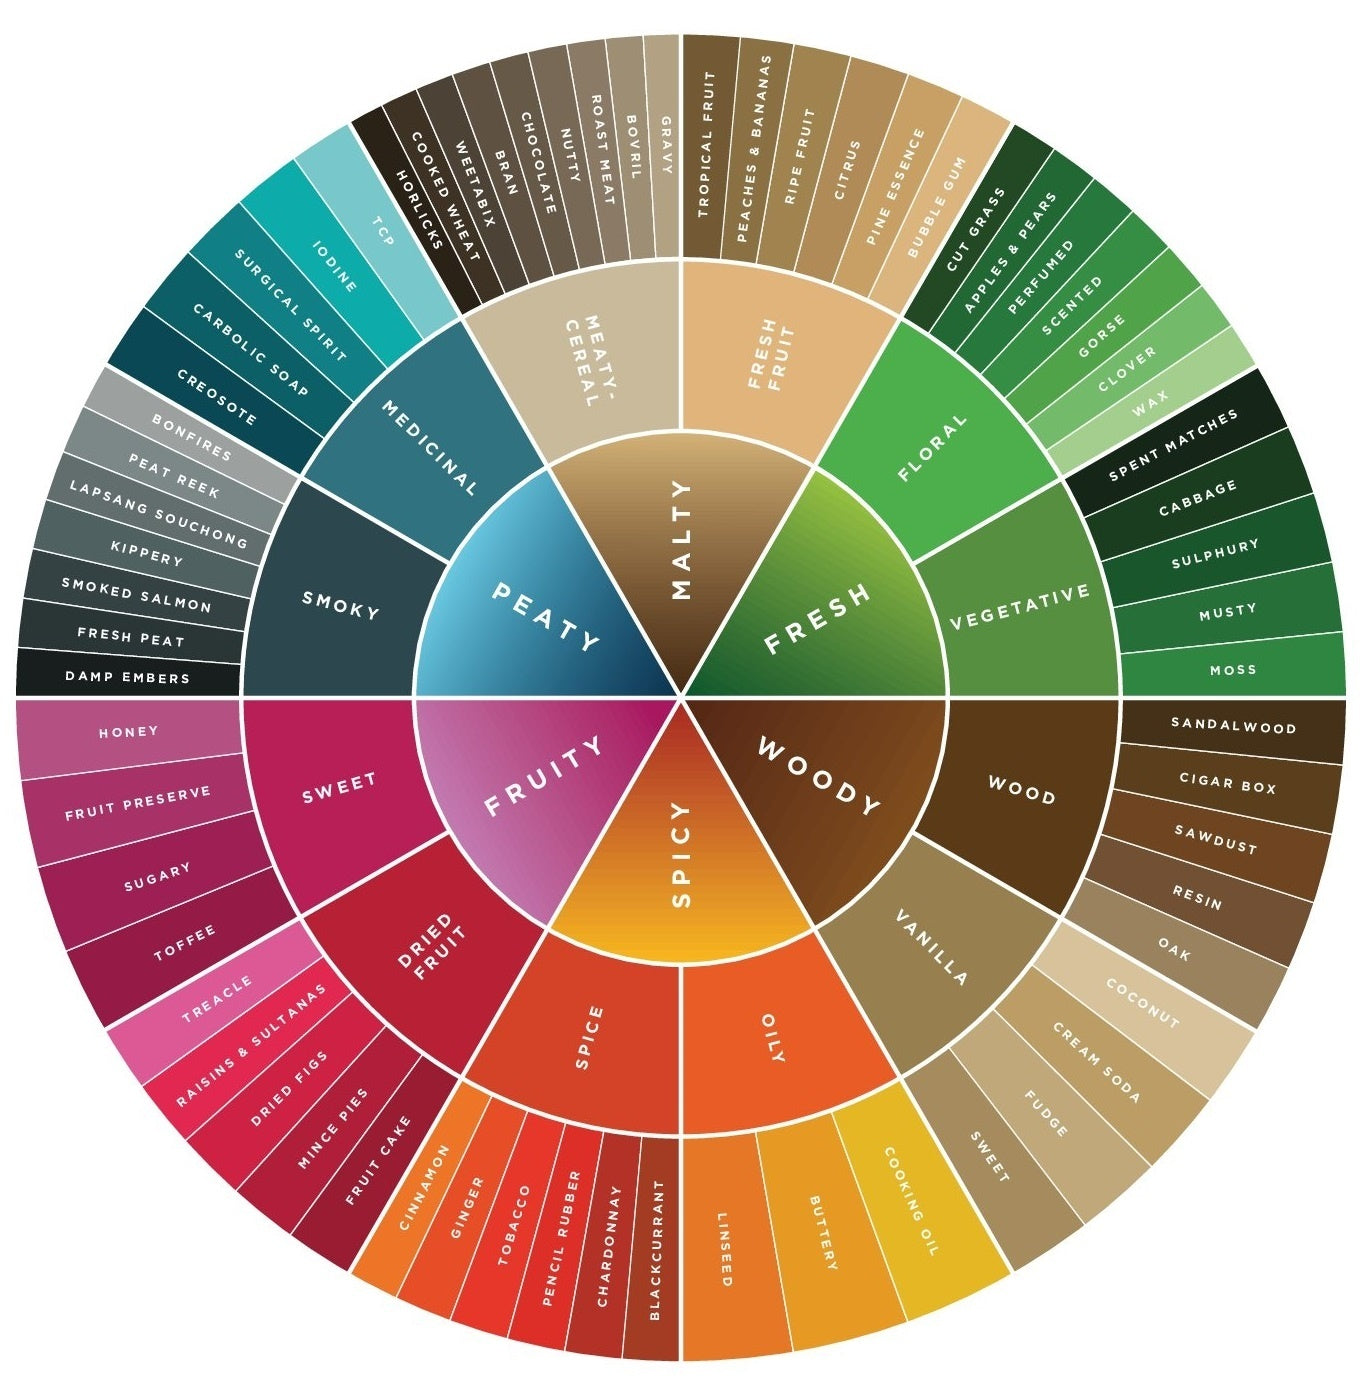 Whiskey Flavor Wheel for Chocolate Pairing